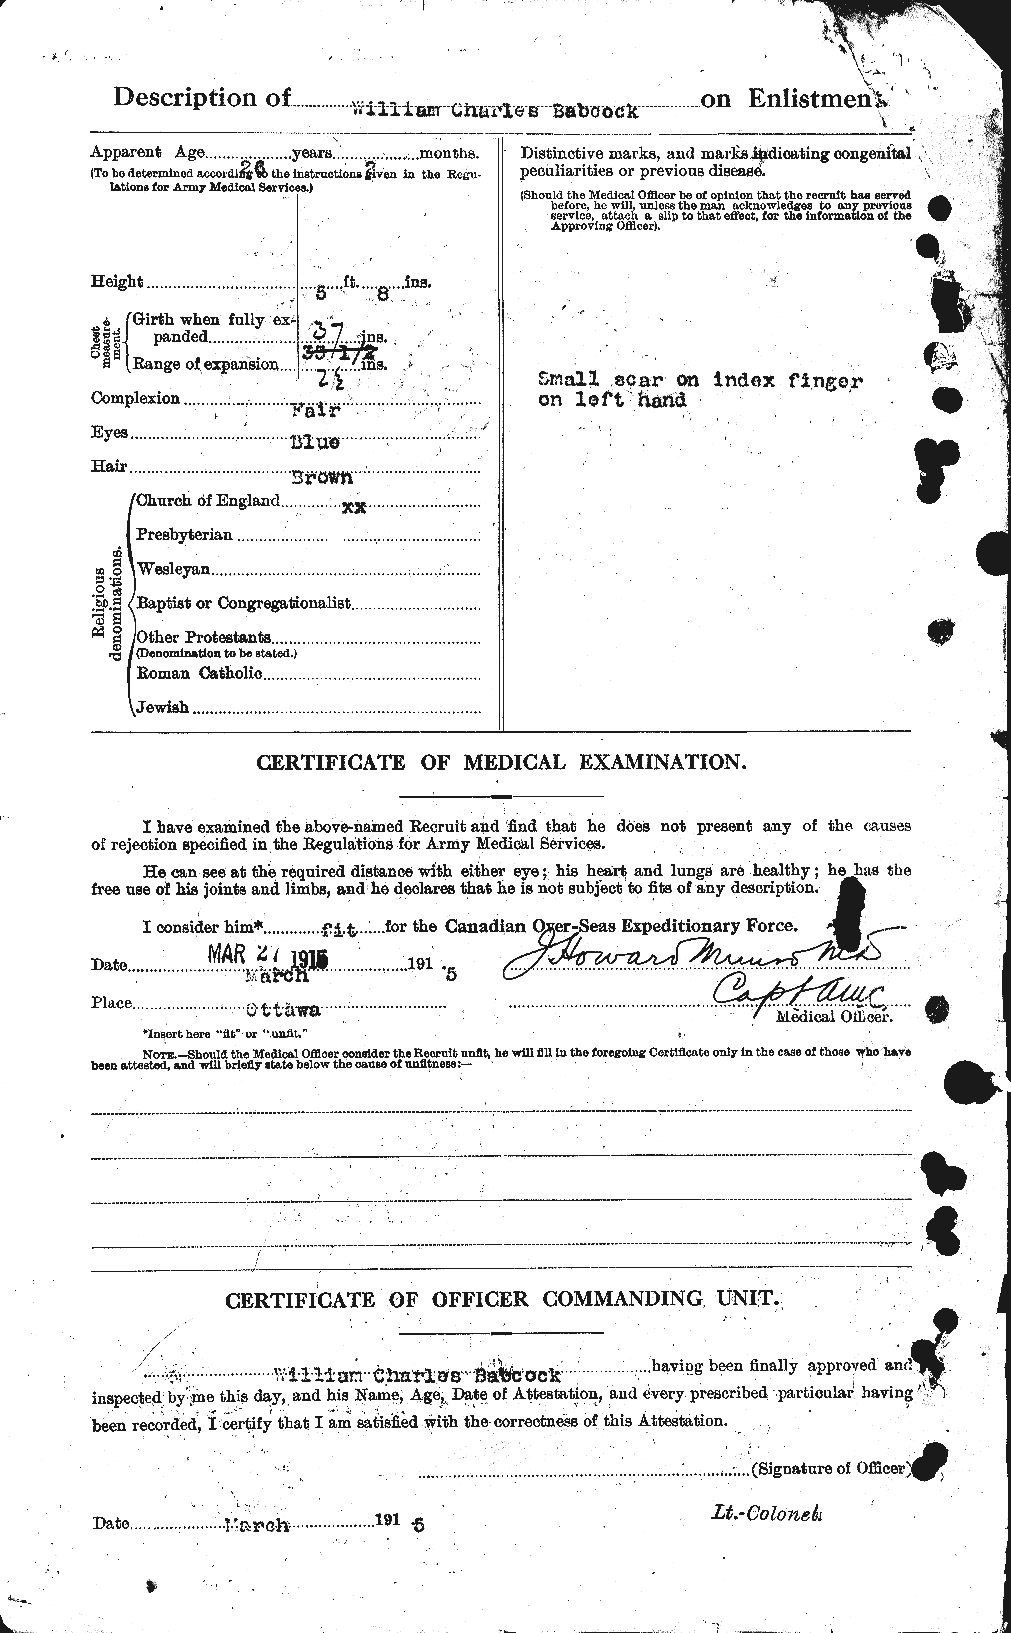 Personnel Records of the First World War - CEF 218192b